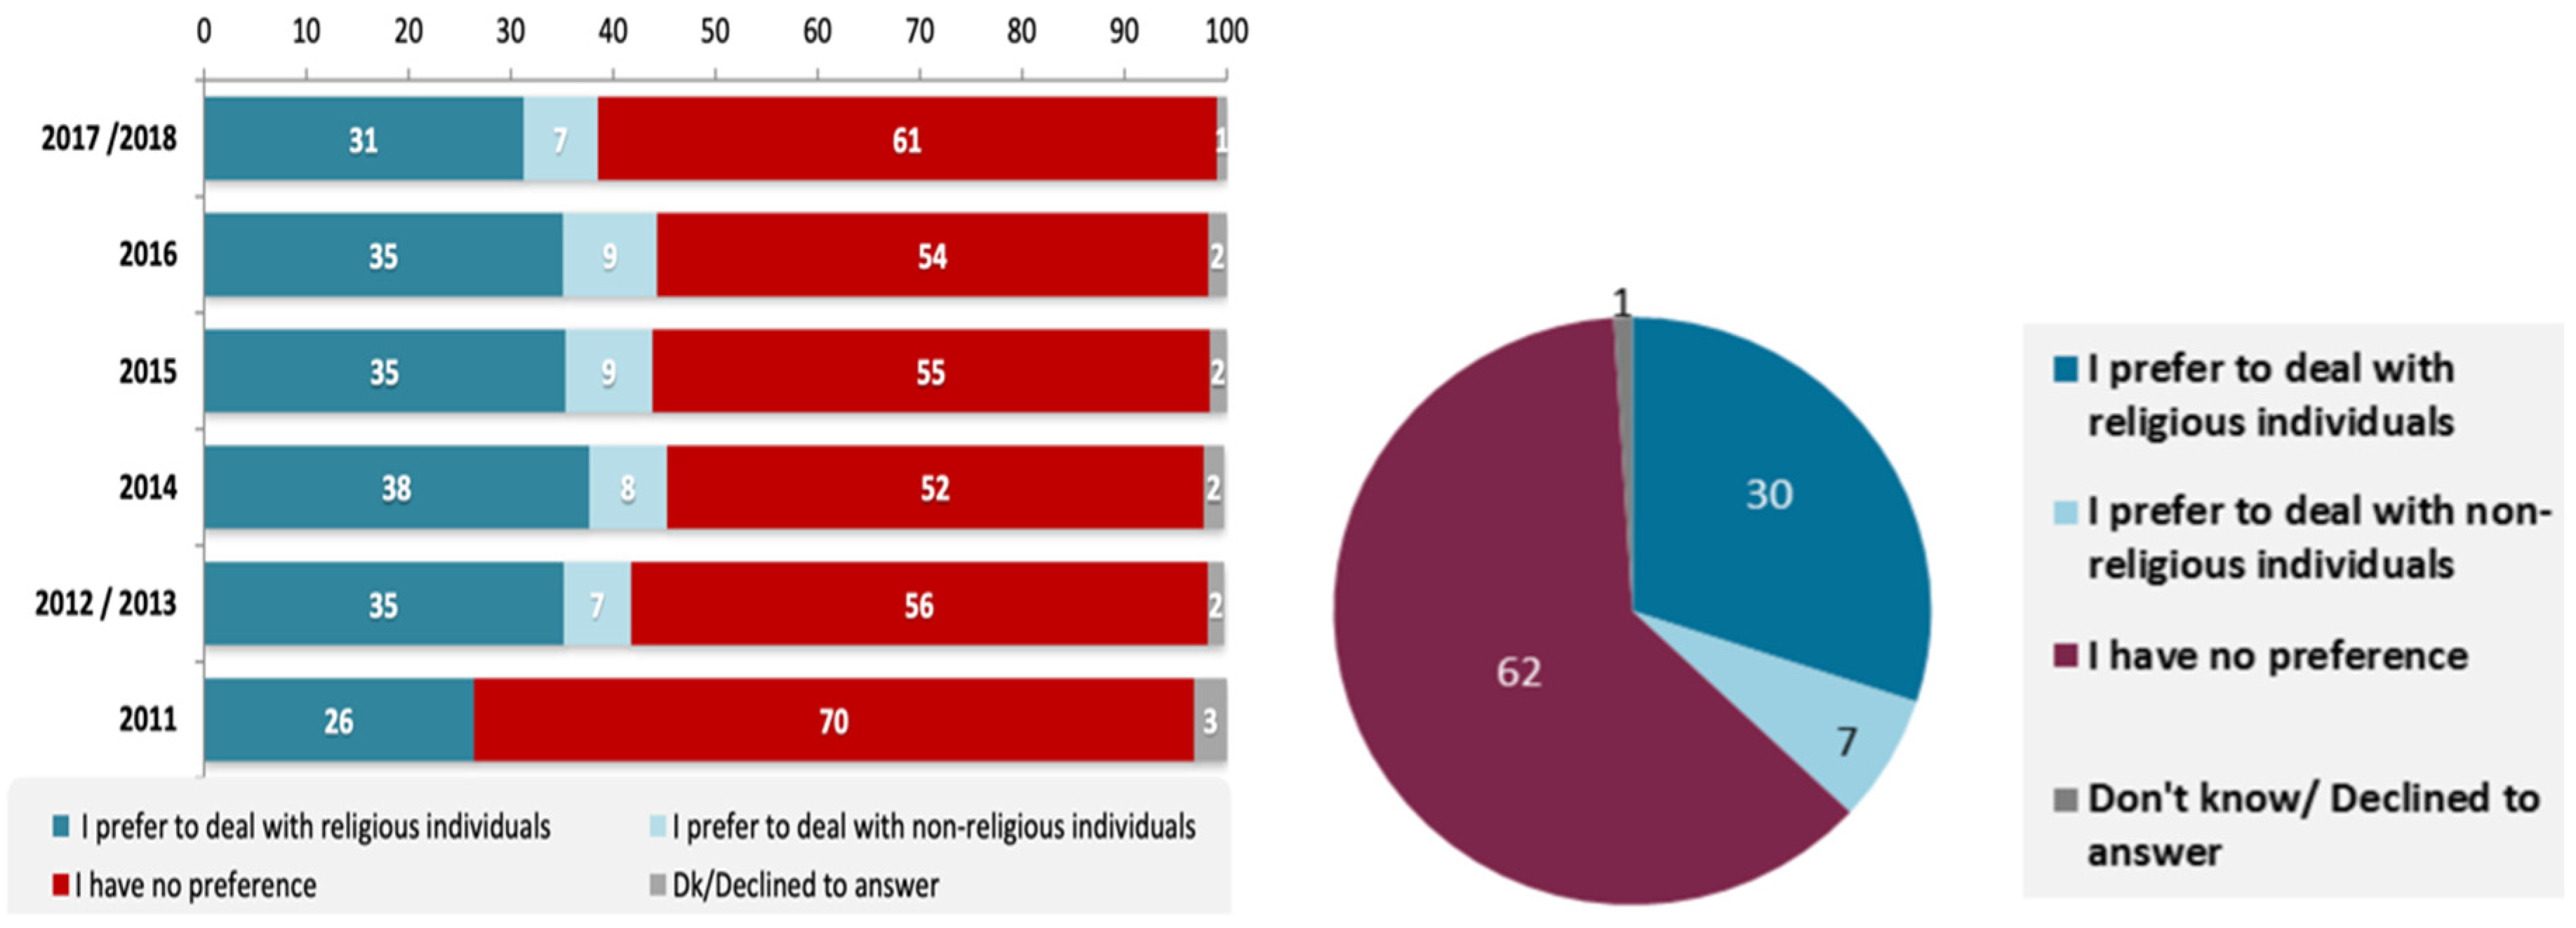 Religions Free Full-Text Political Bias against Atheists Talk Shows Targeting Arabic-Speaking Audiences